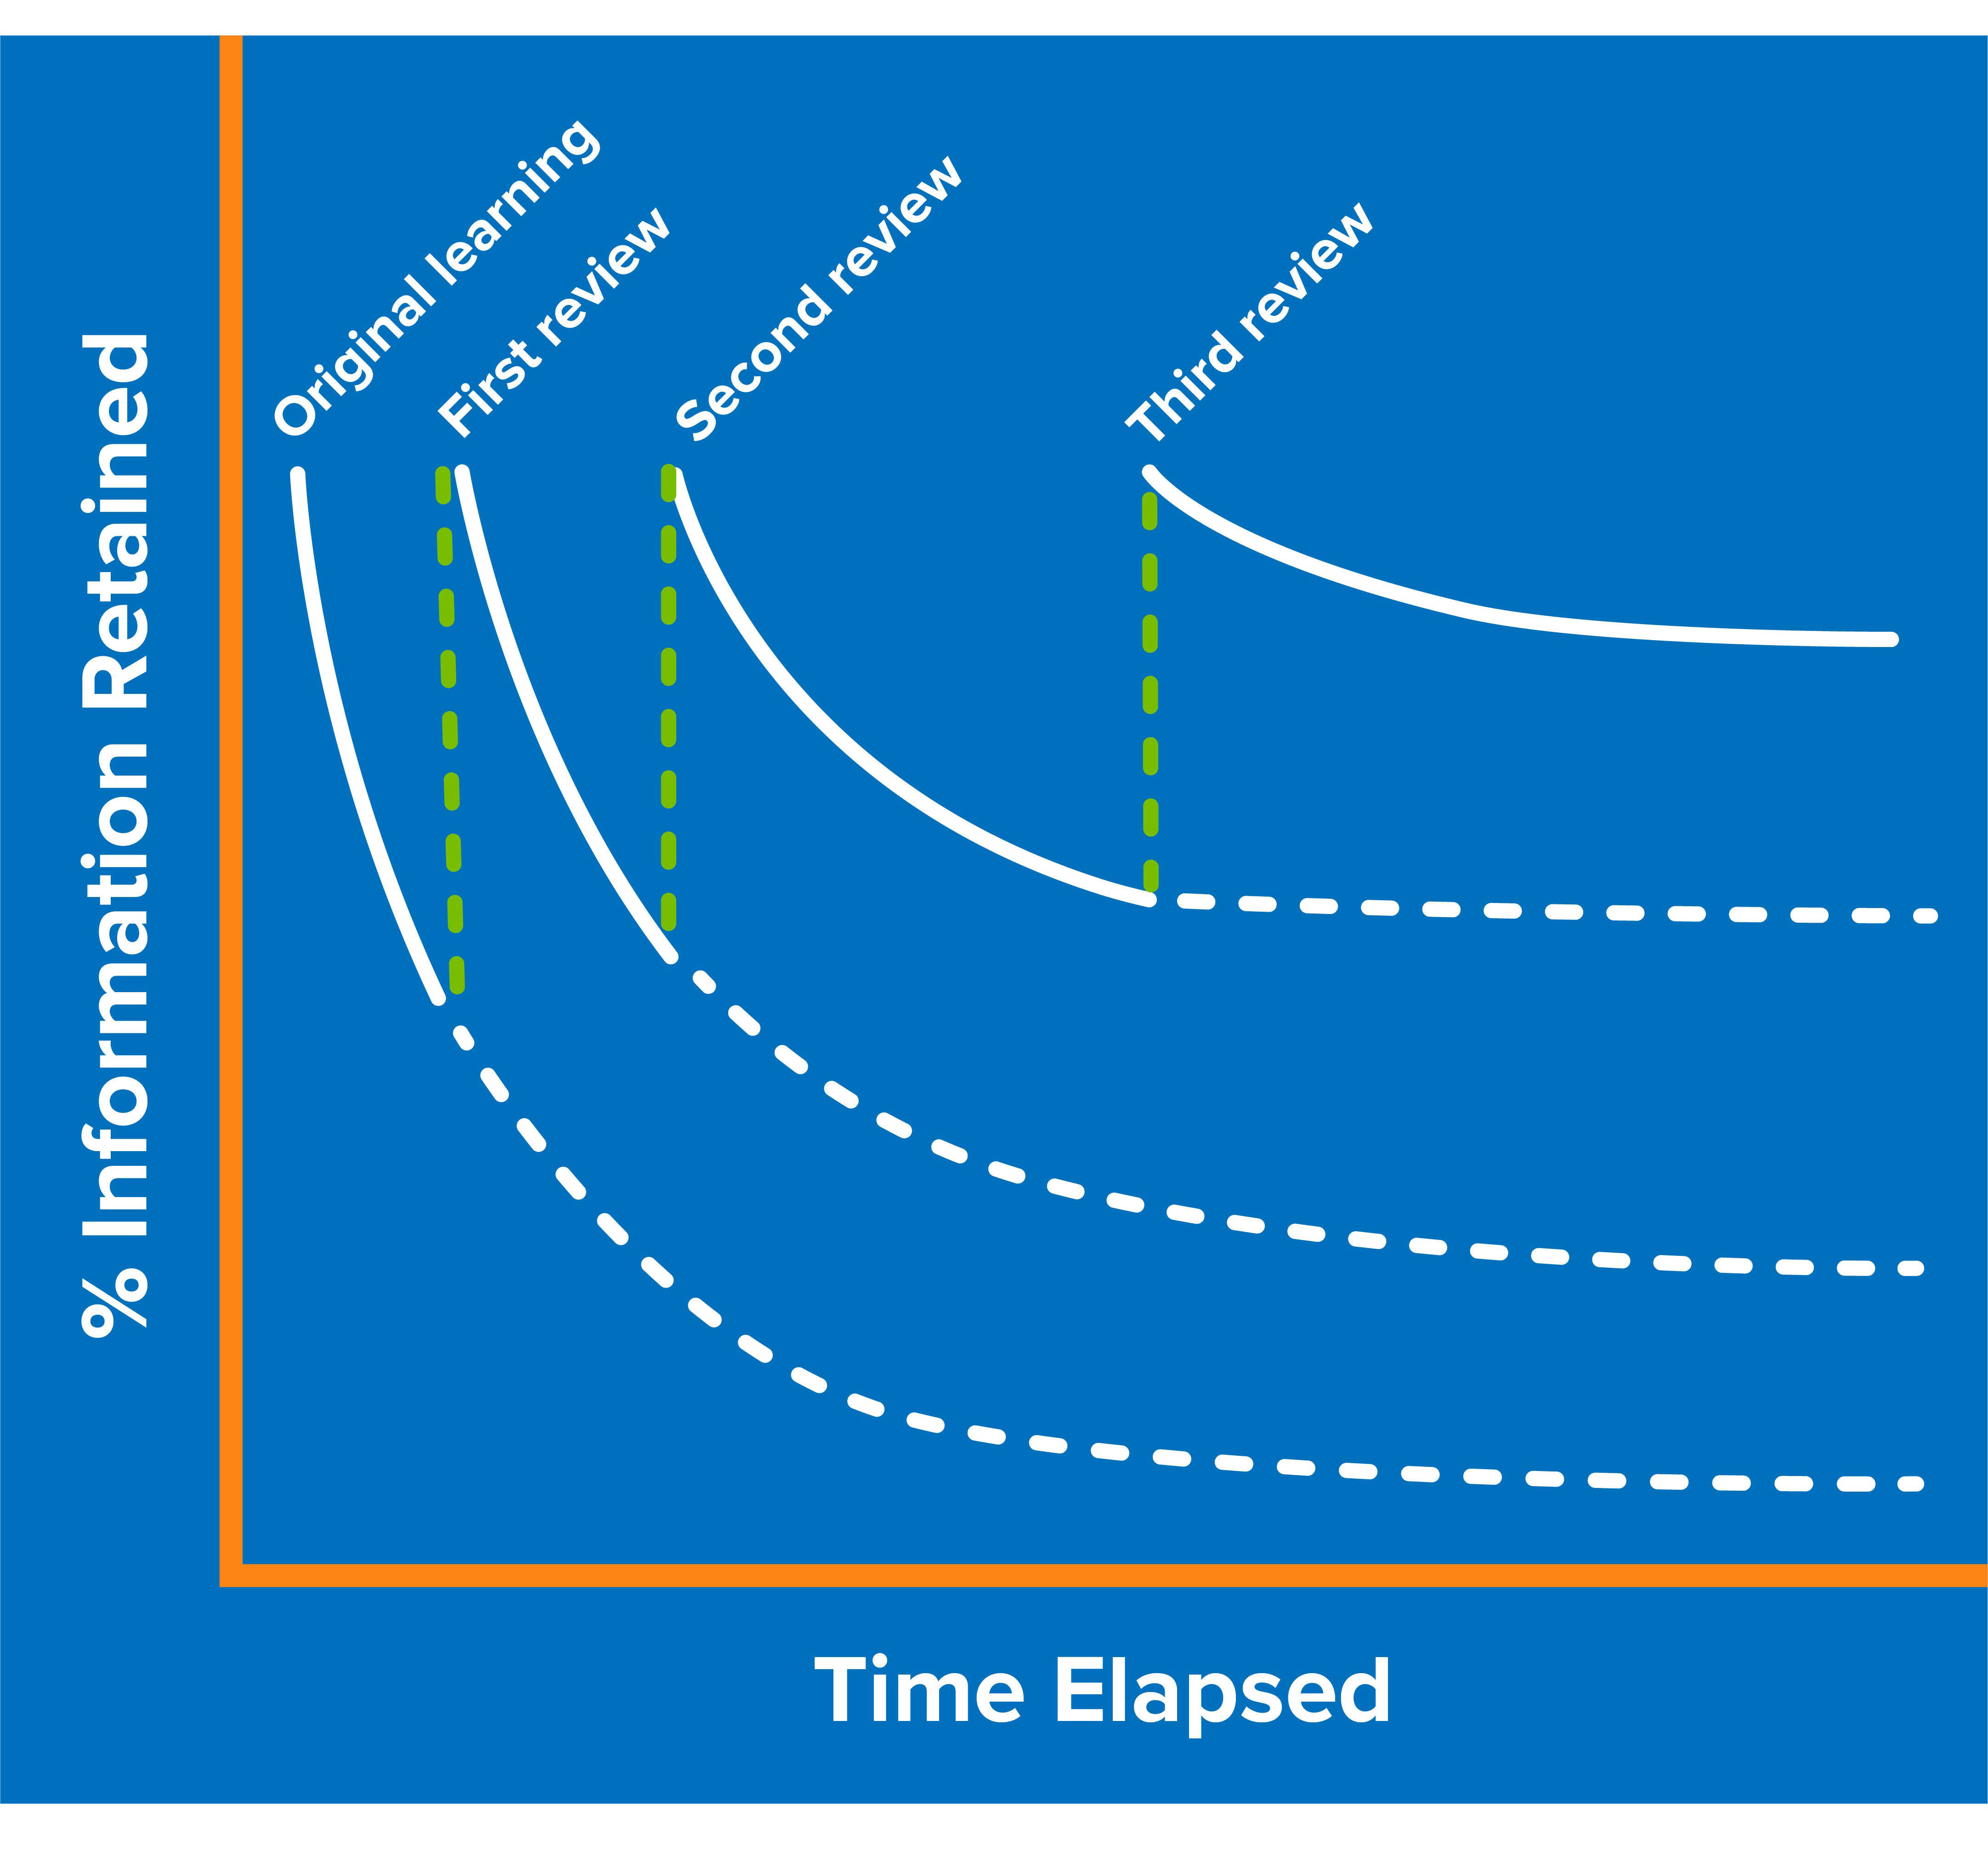 Using Spaced Learning to Combat the Forgetting Curve